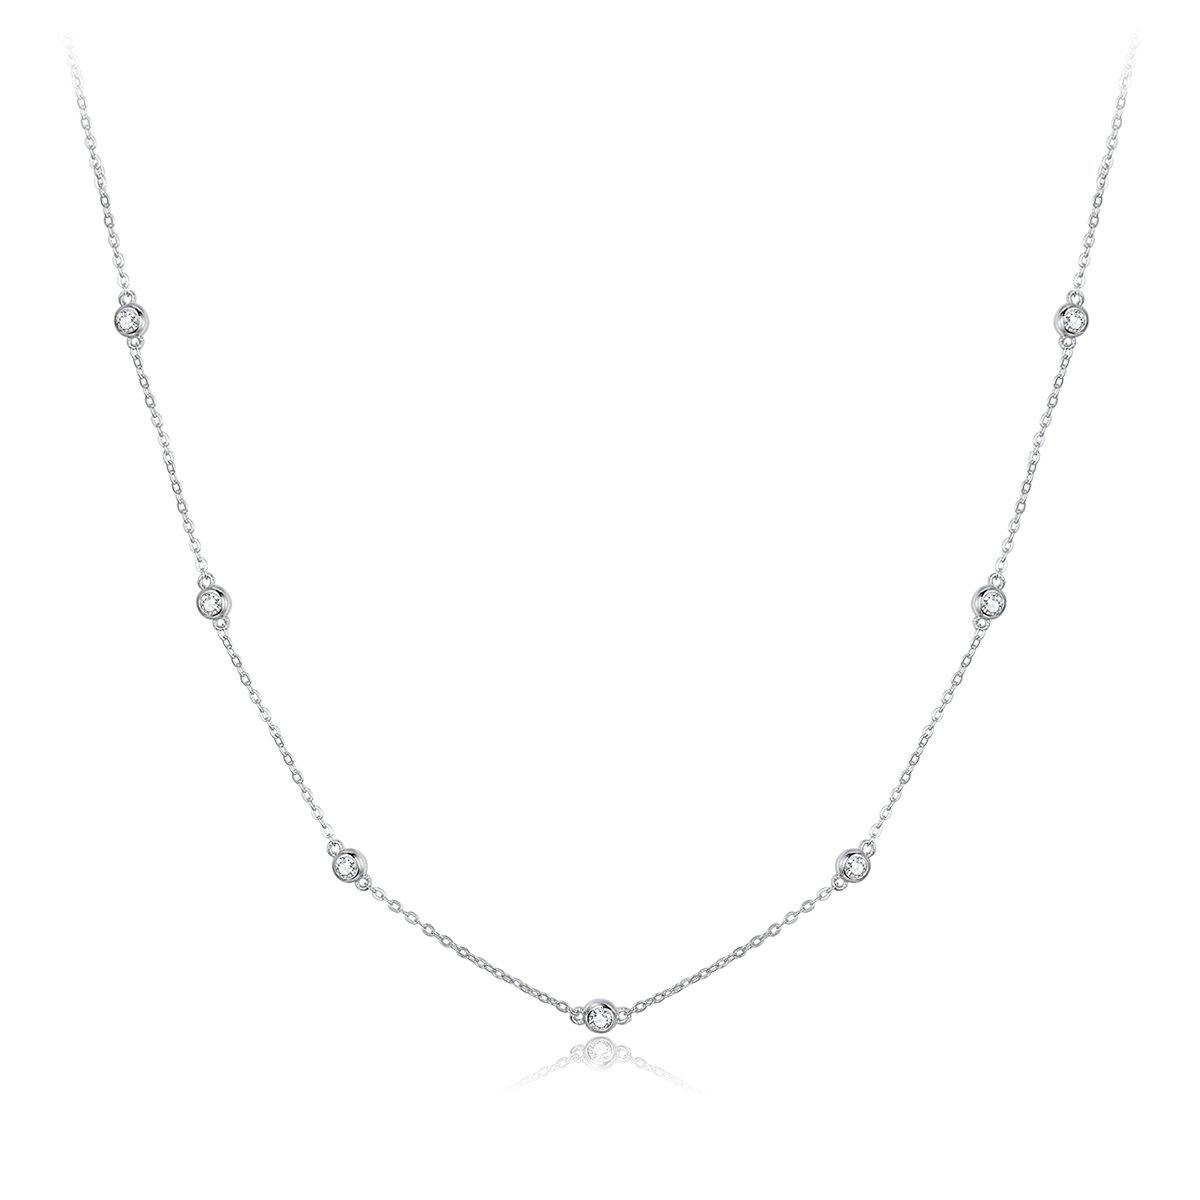 Romantic Shine 925 Sterling Silver Necklace - Aisllin Jewelry